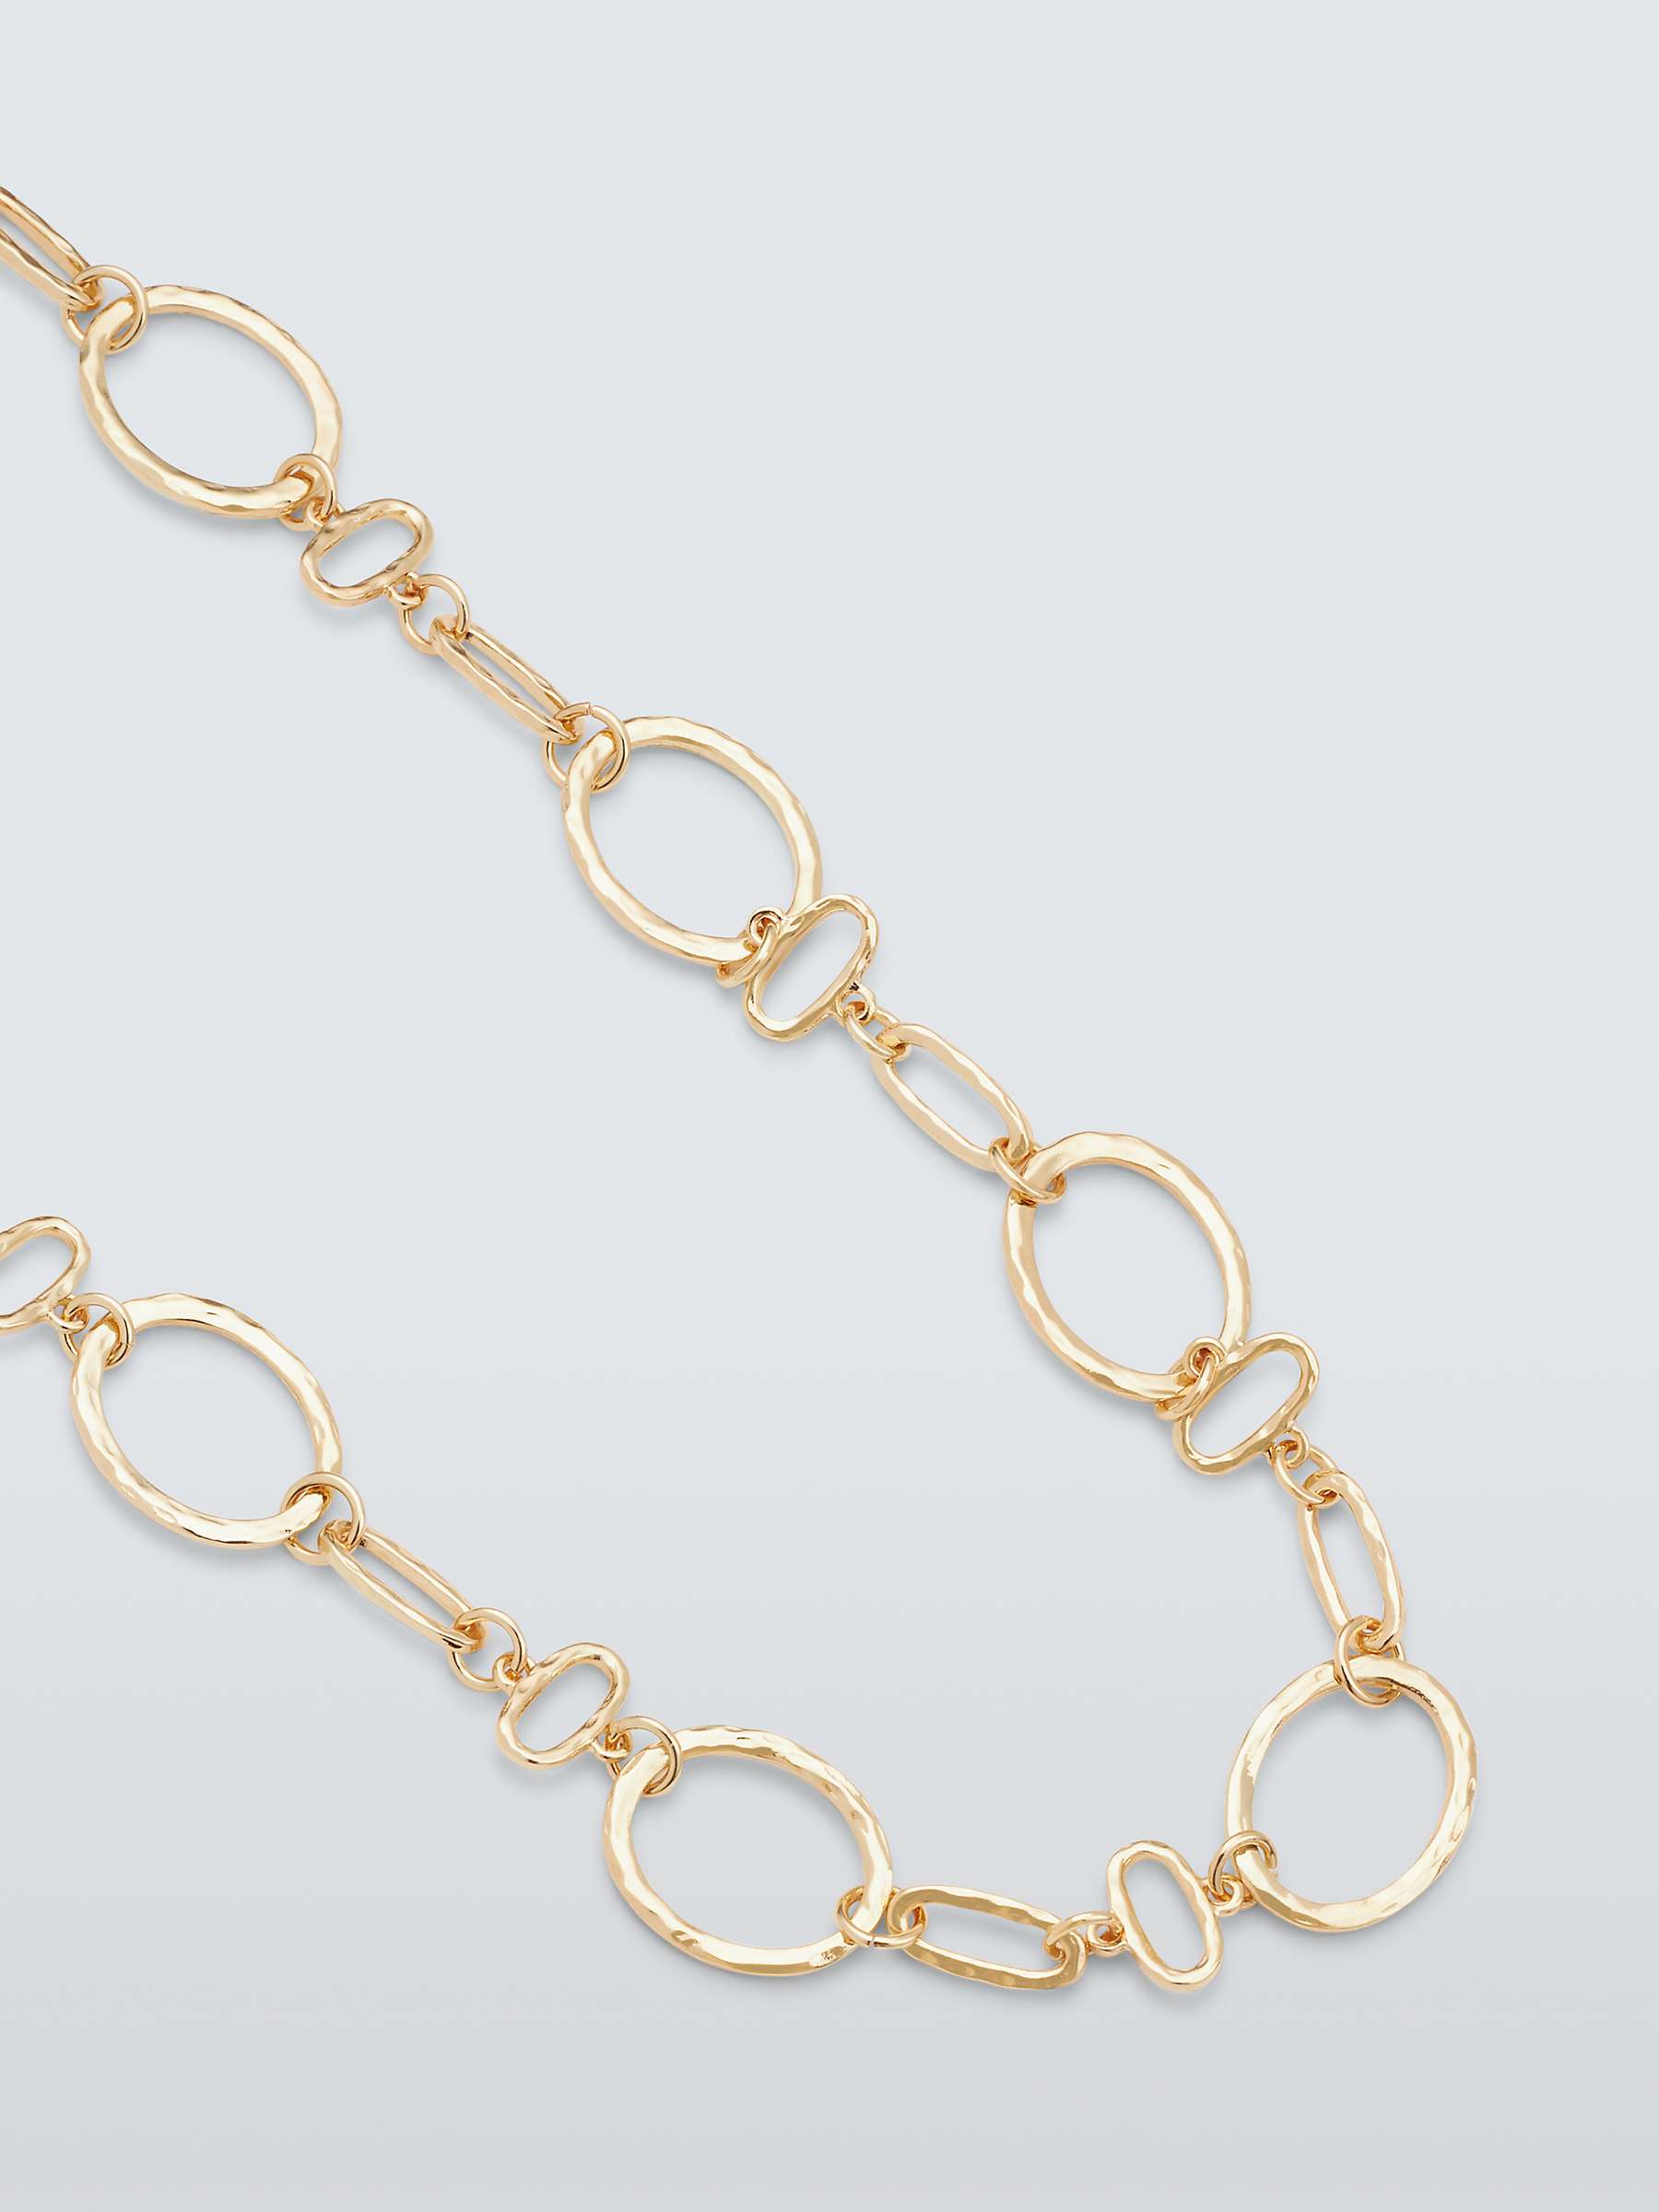 Buy John Lewis Hammered Mixed Link Collar Necklace, Gold Online at johnlewis.com